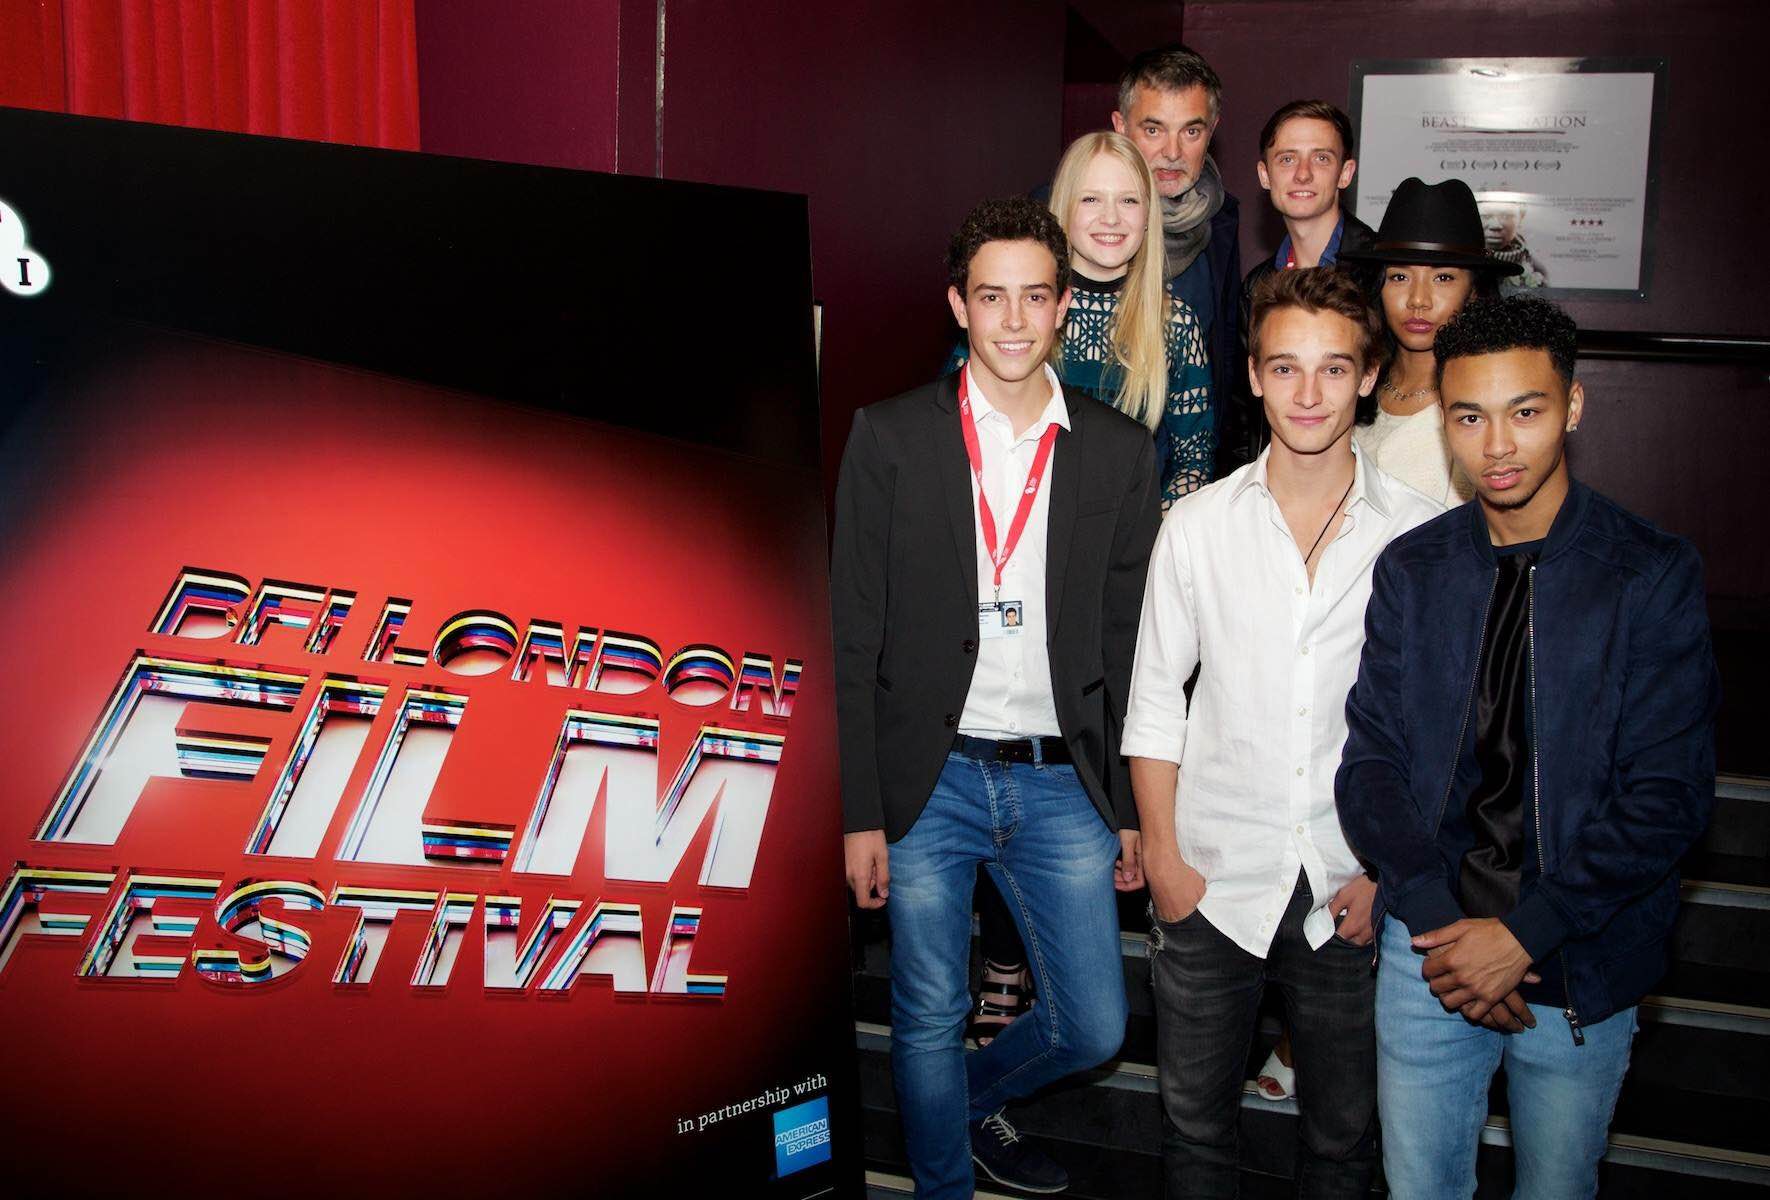 Diego Méndez, Thierry Poiraud and cast at the premiere of Don't Grow Up at the BFI London Film Festival